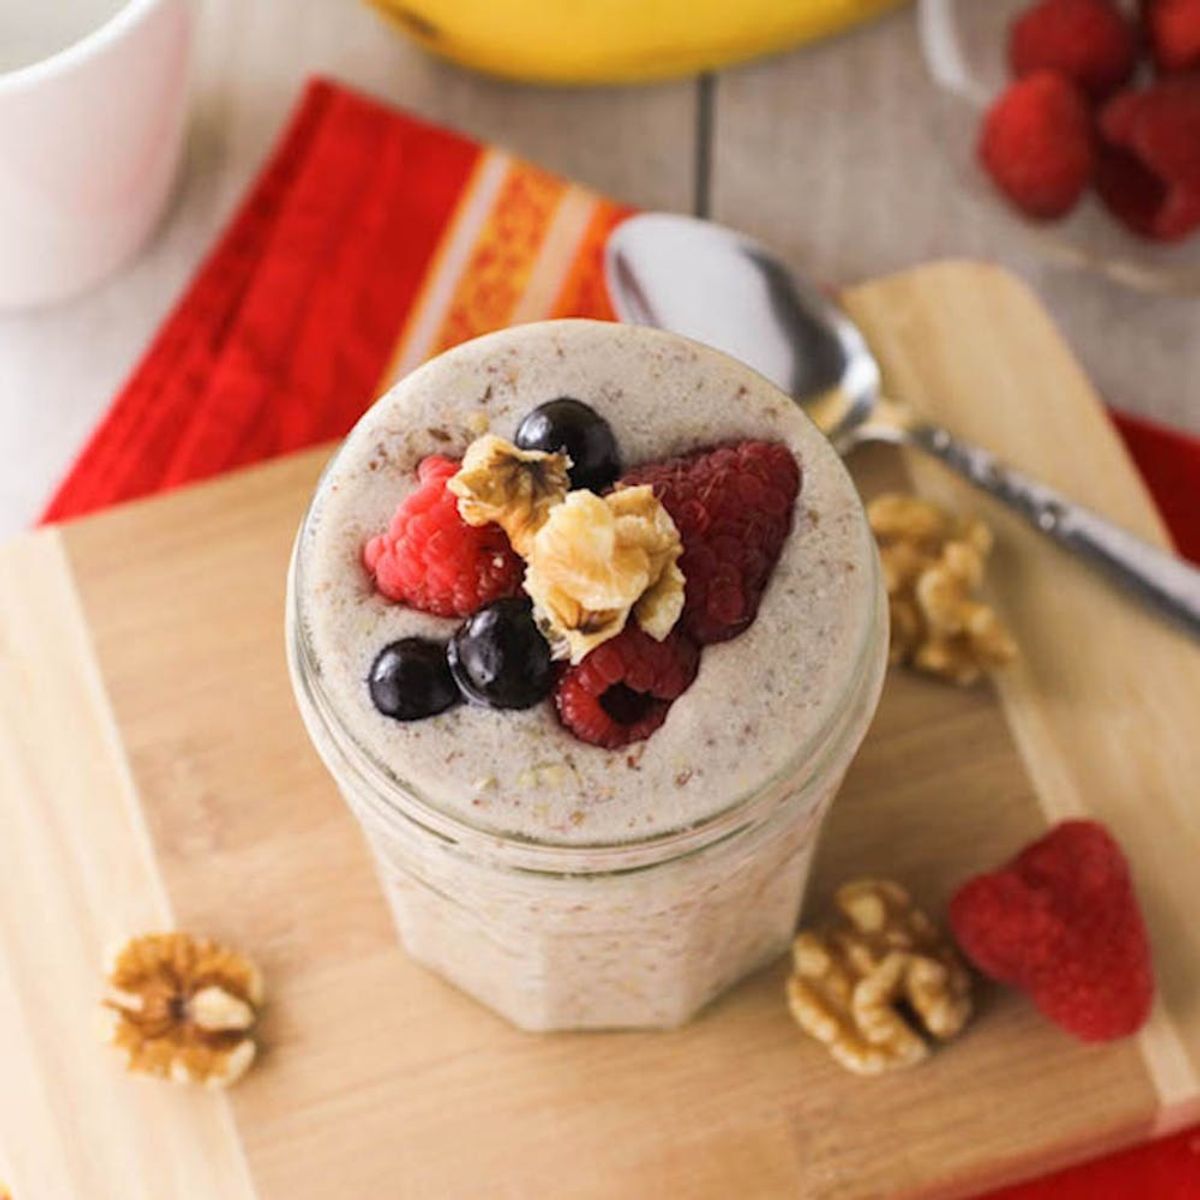 15 Mason Jar Recipes to Take You from Breakfast Through Happy Hour